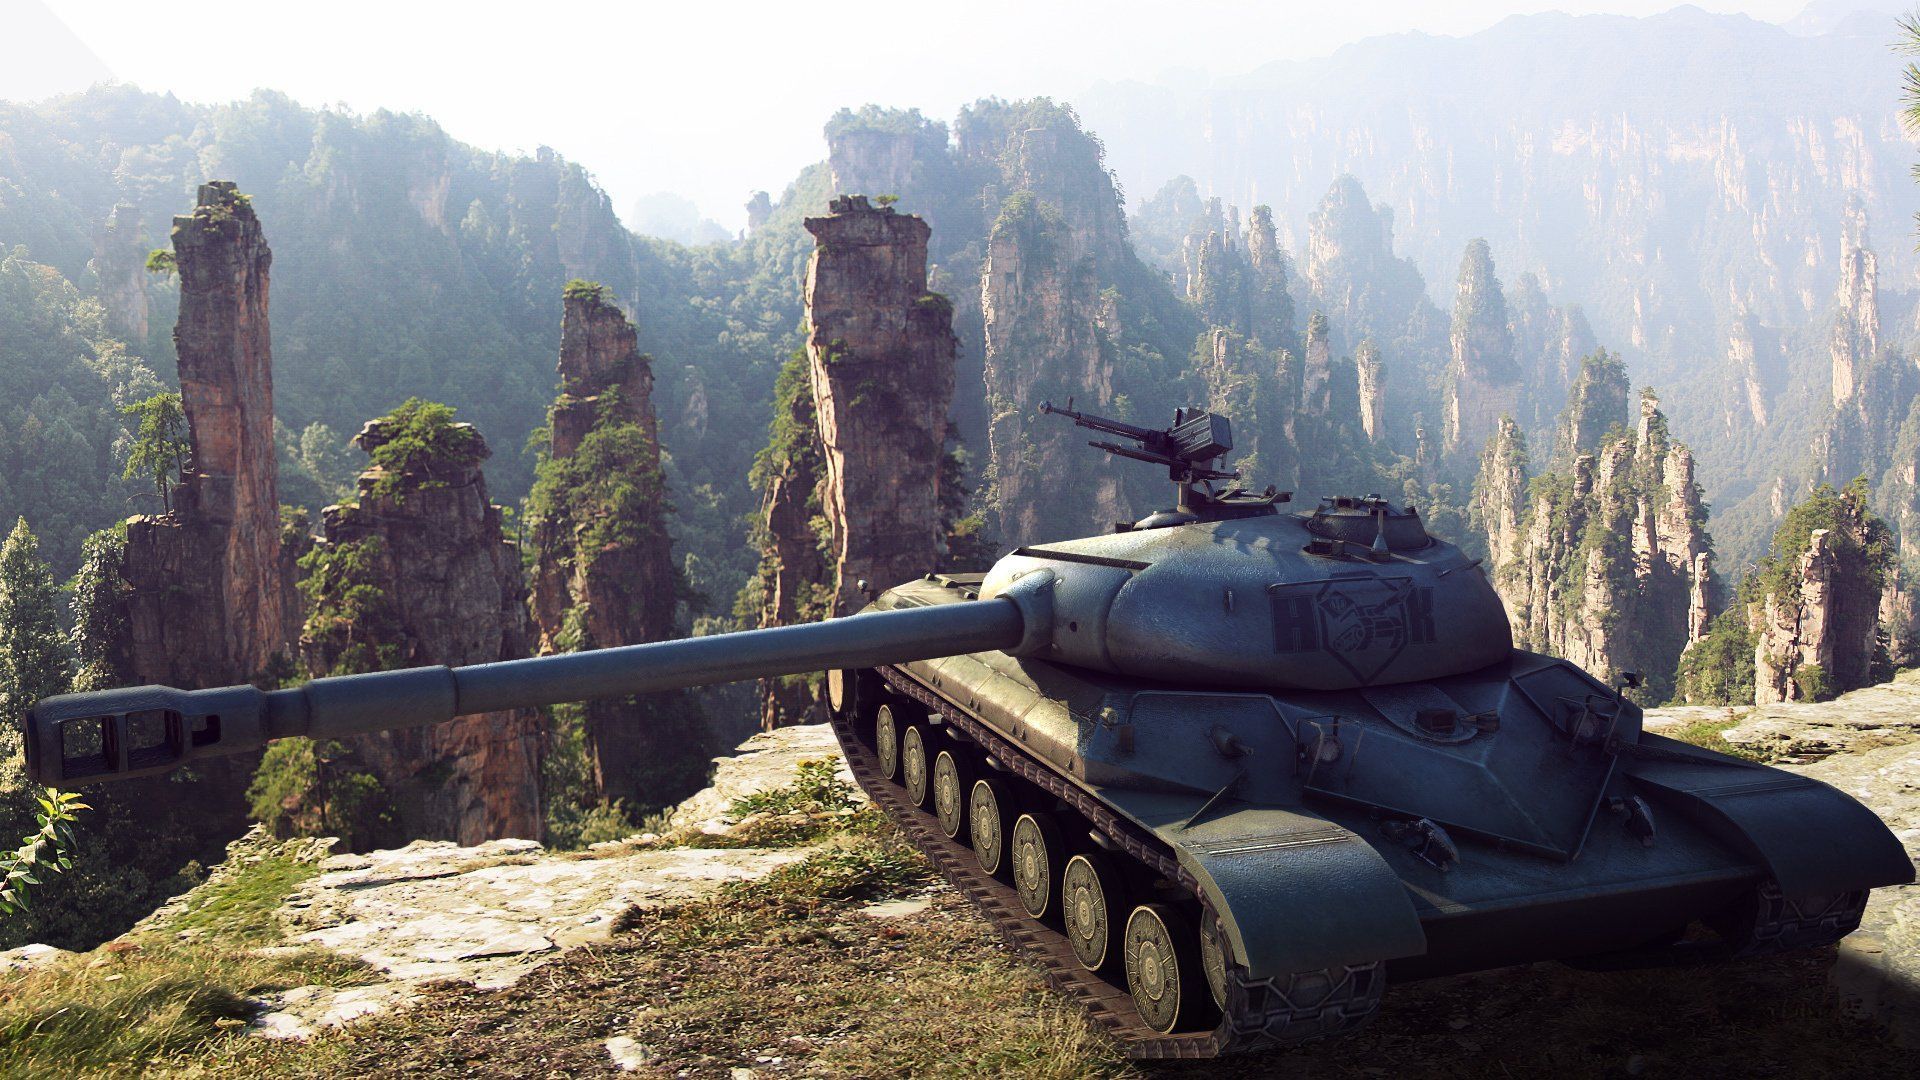 World Of Tanks HD Wallpapers, World Of Tanks Images, New Wallpapers